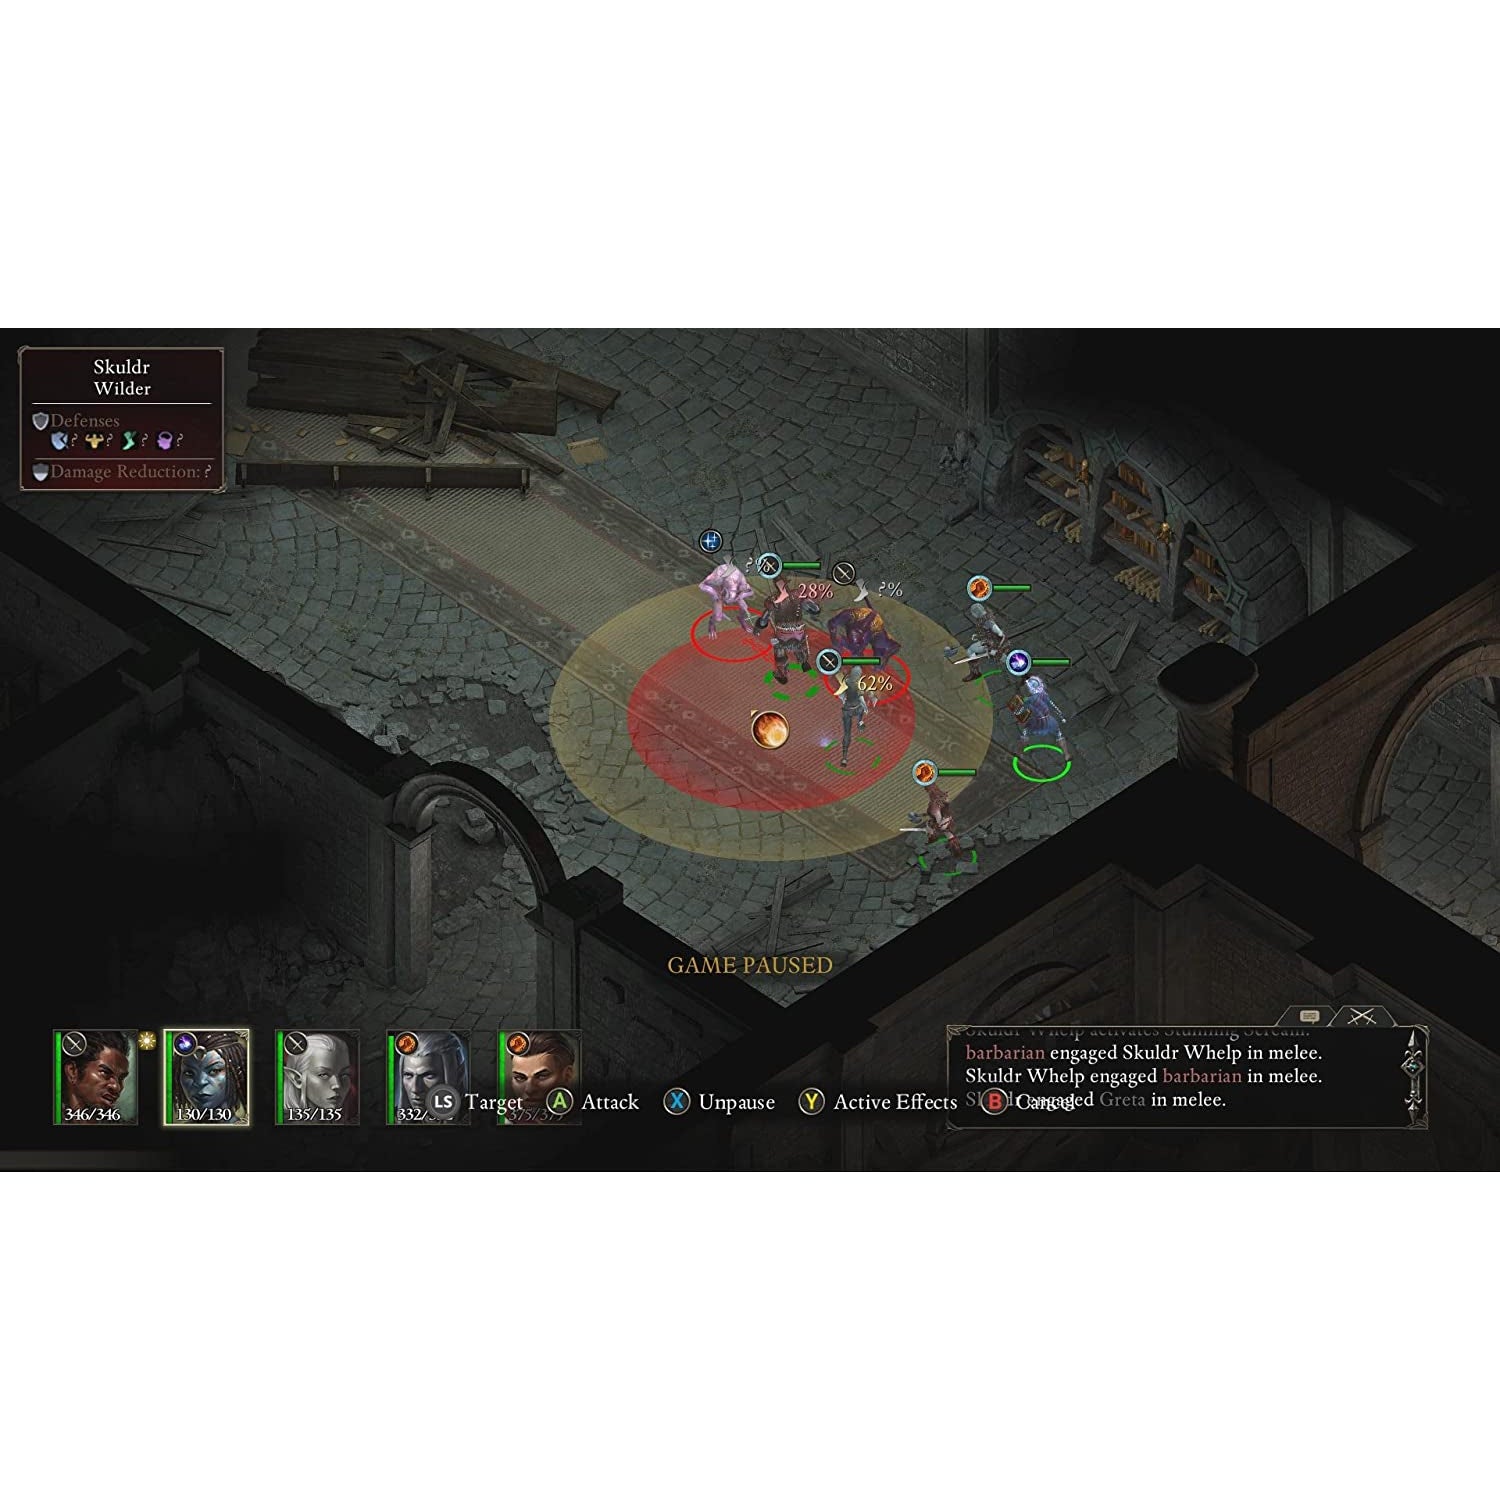 Pillars of Eternity Complete Edition (Xbox One)